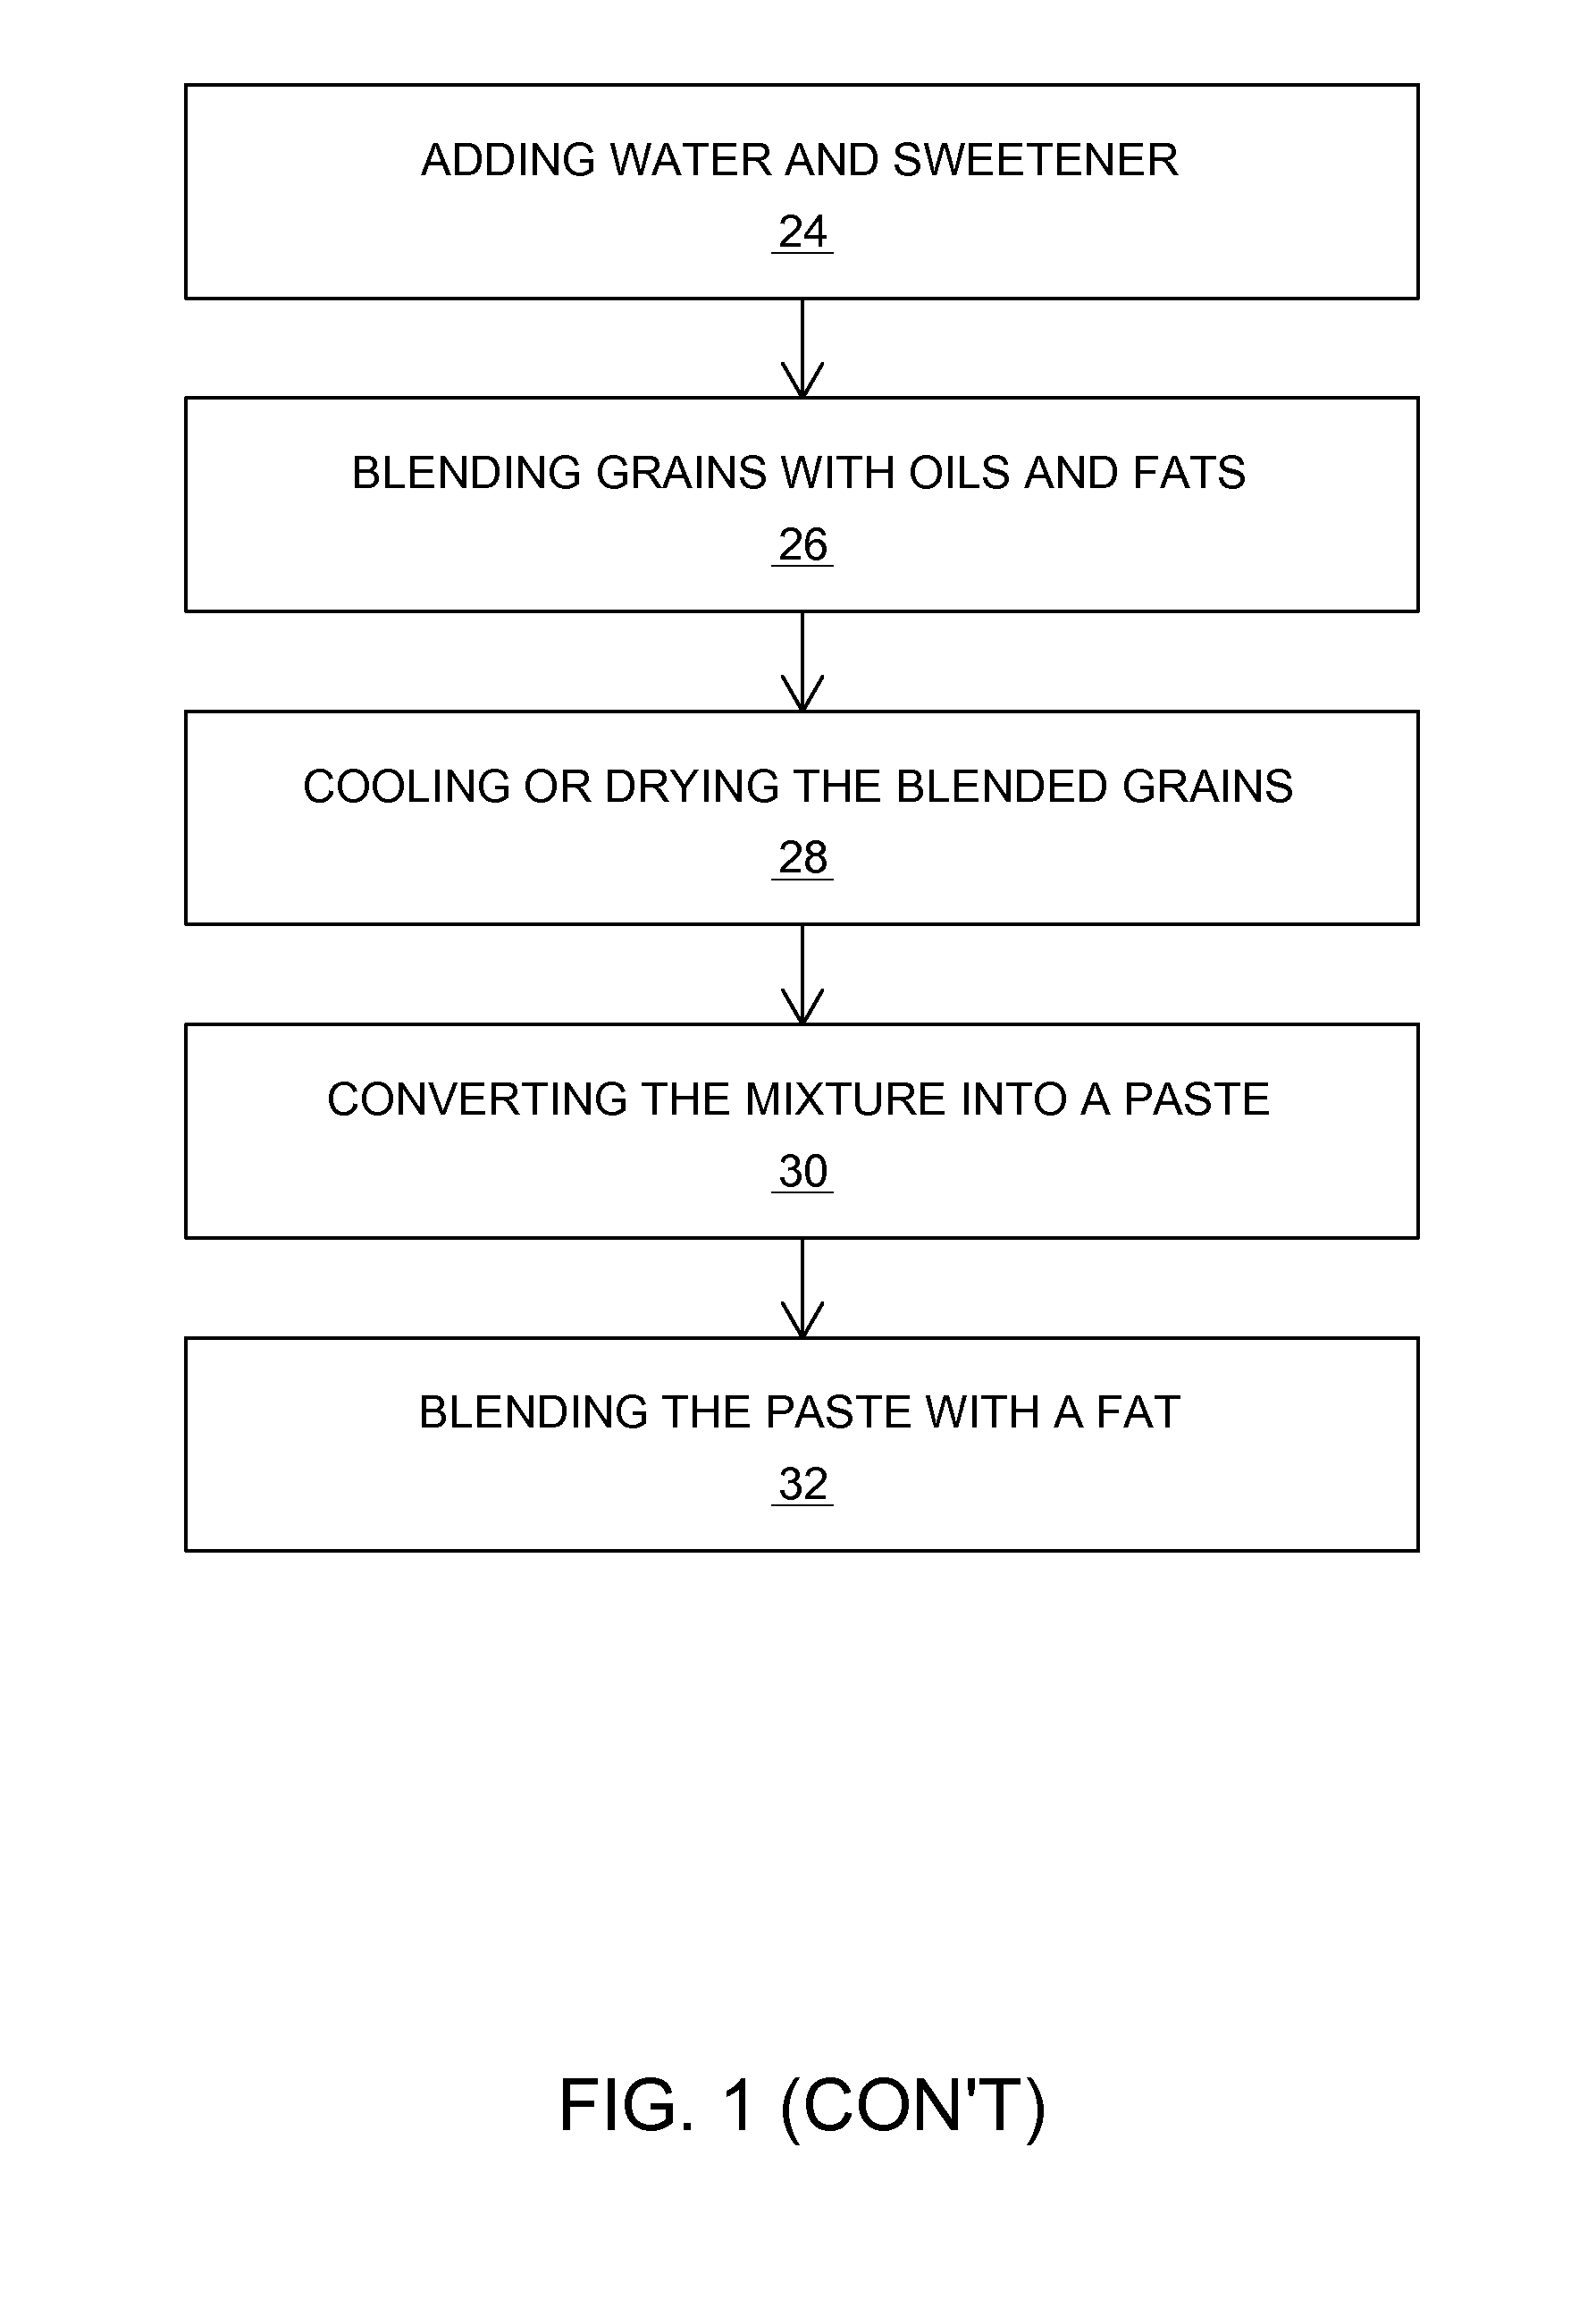 Method of manufacturing a fermented product